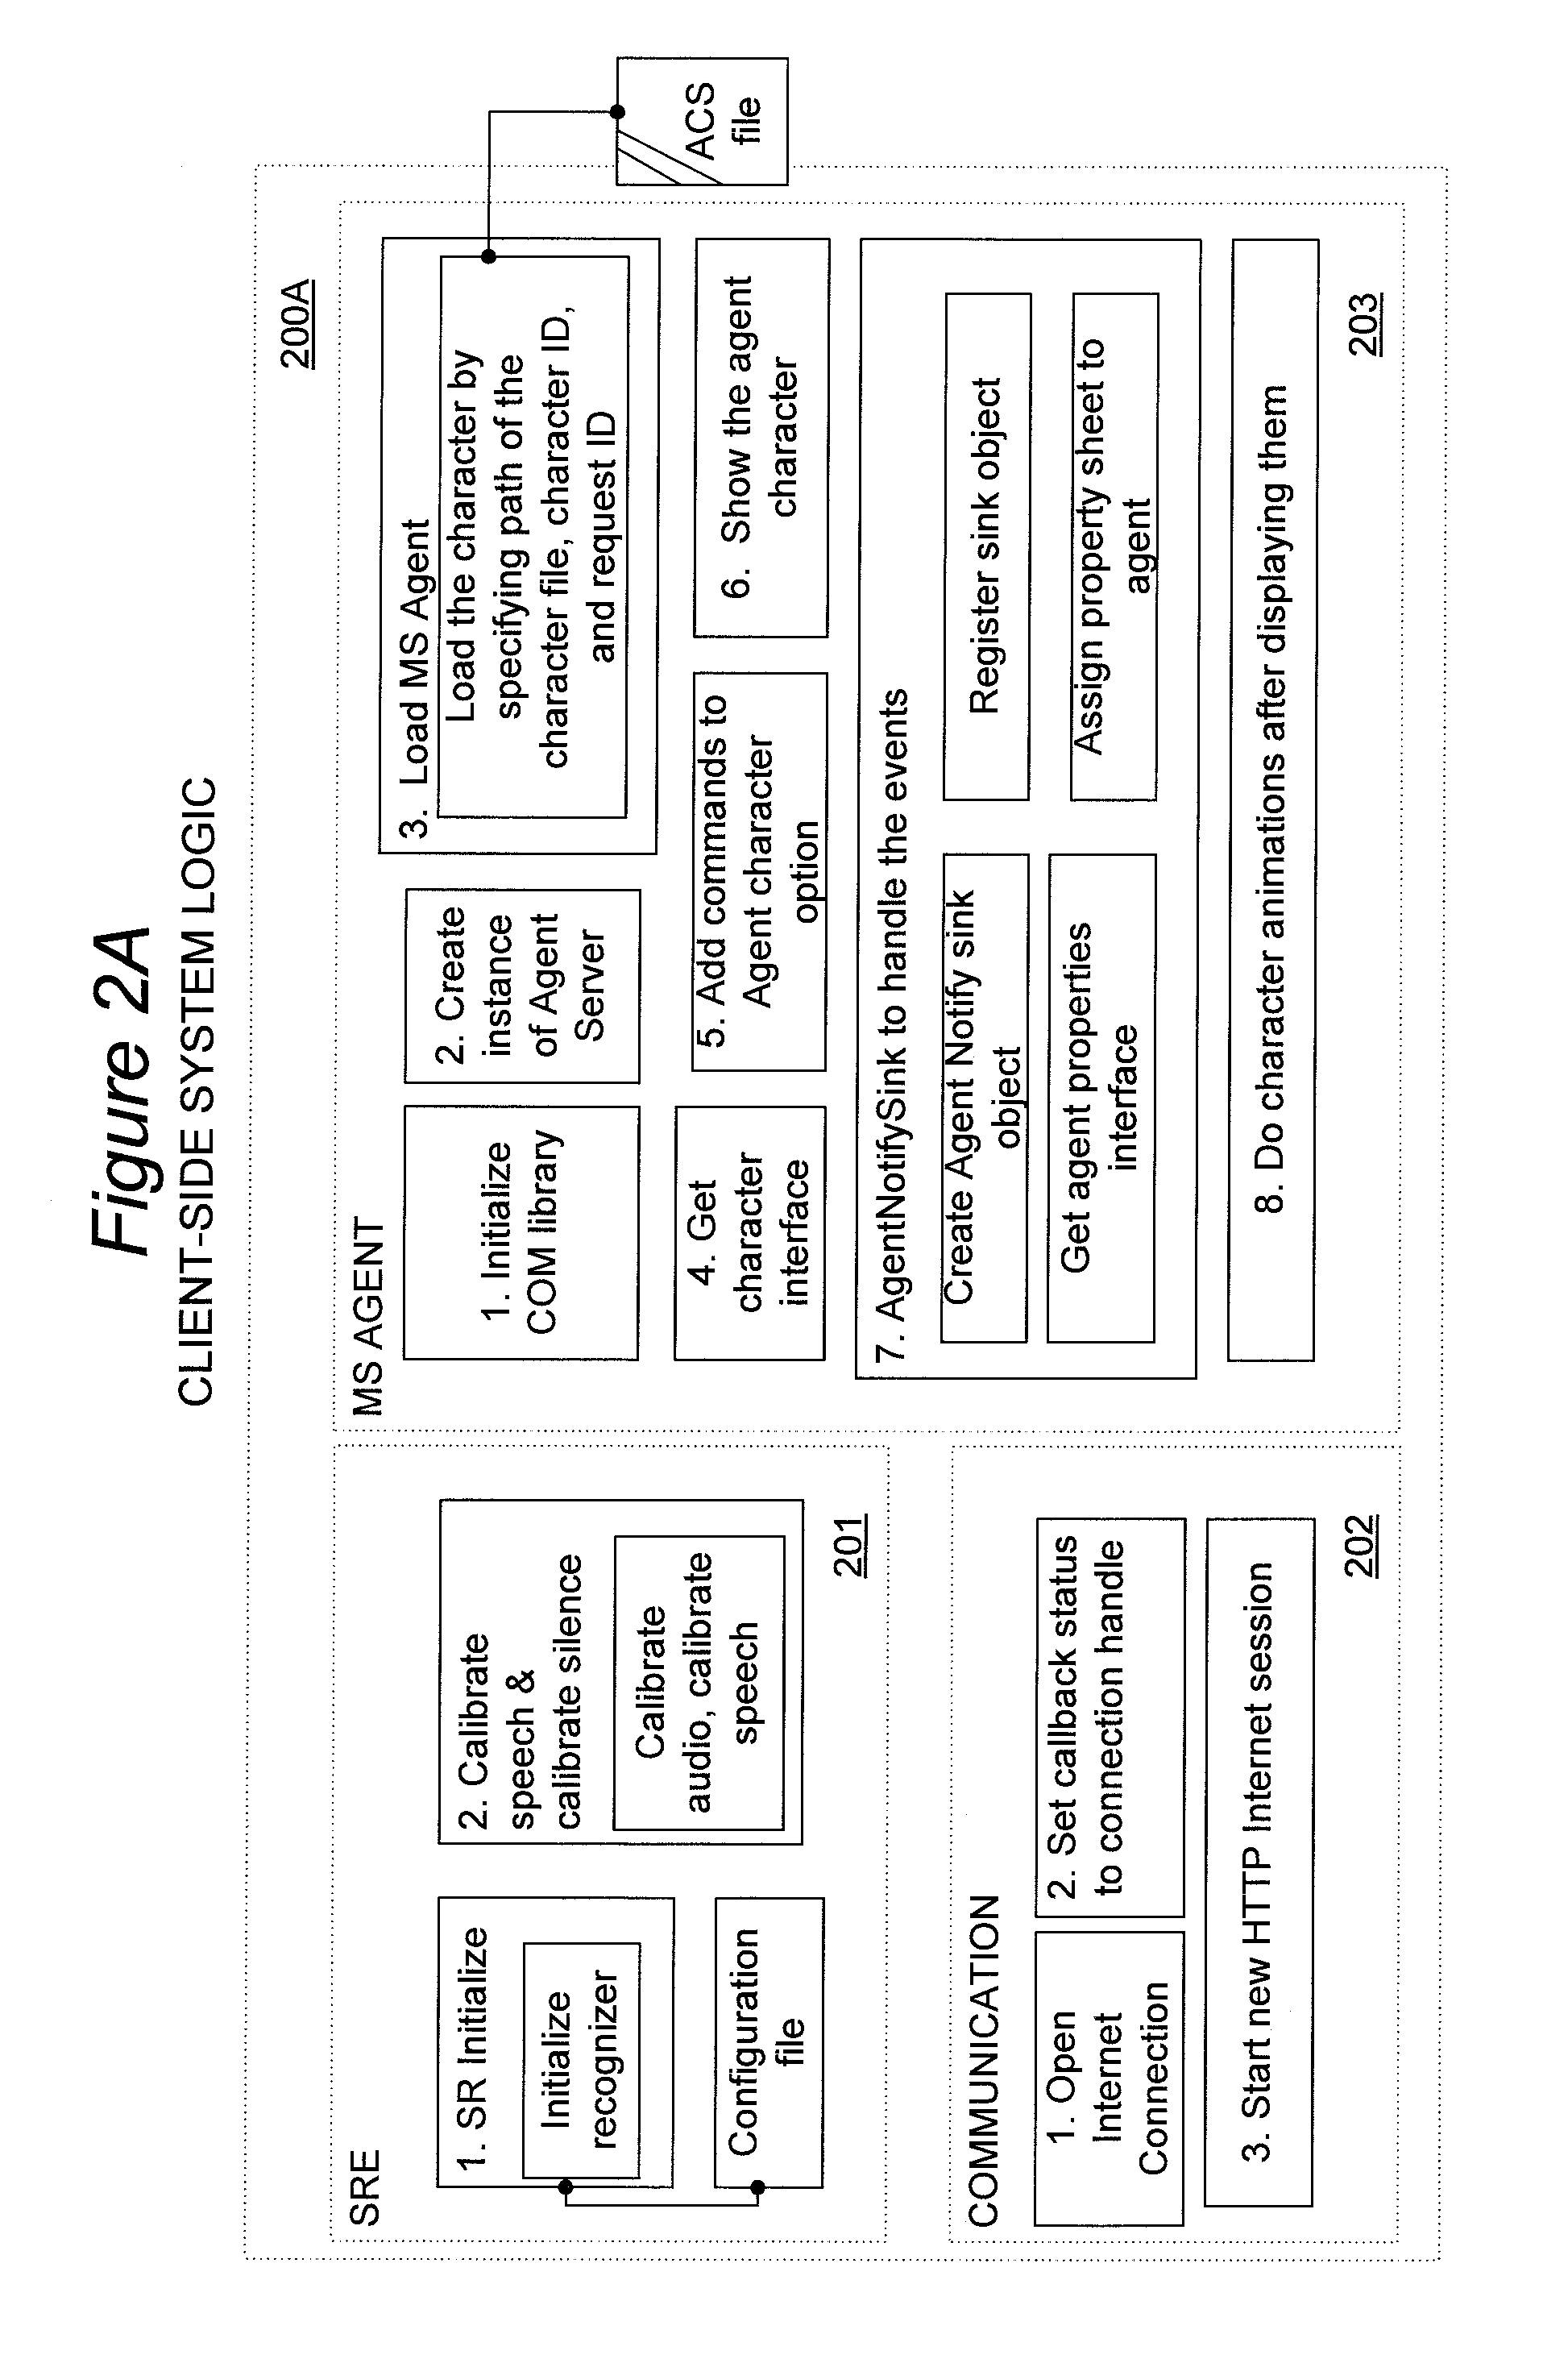 Network based interactive speech recognition system